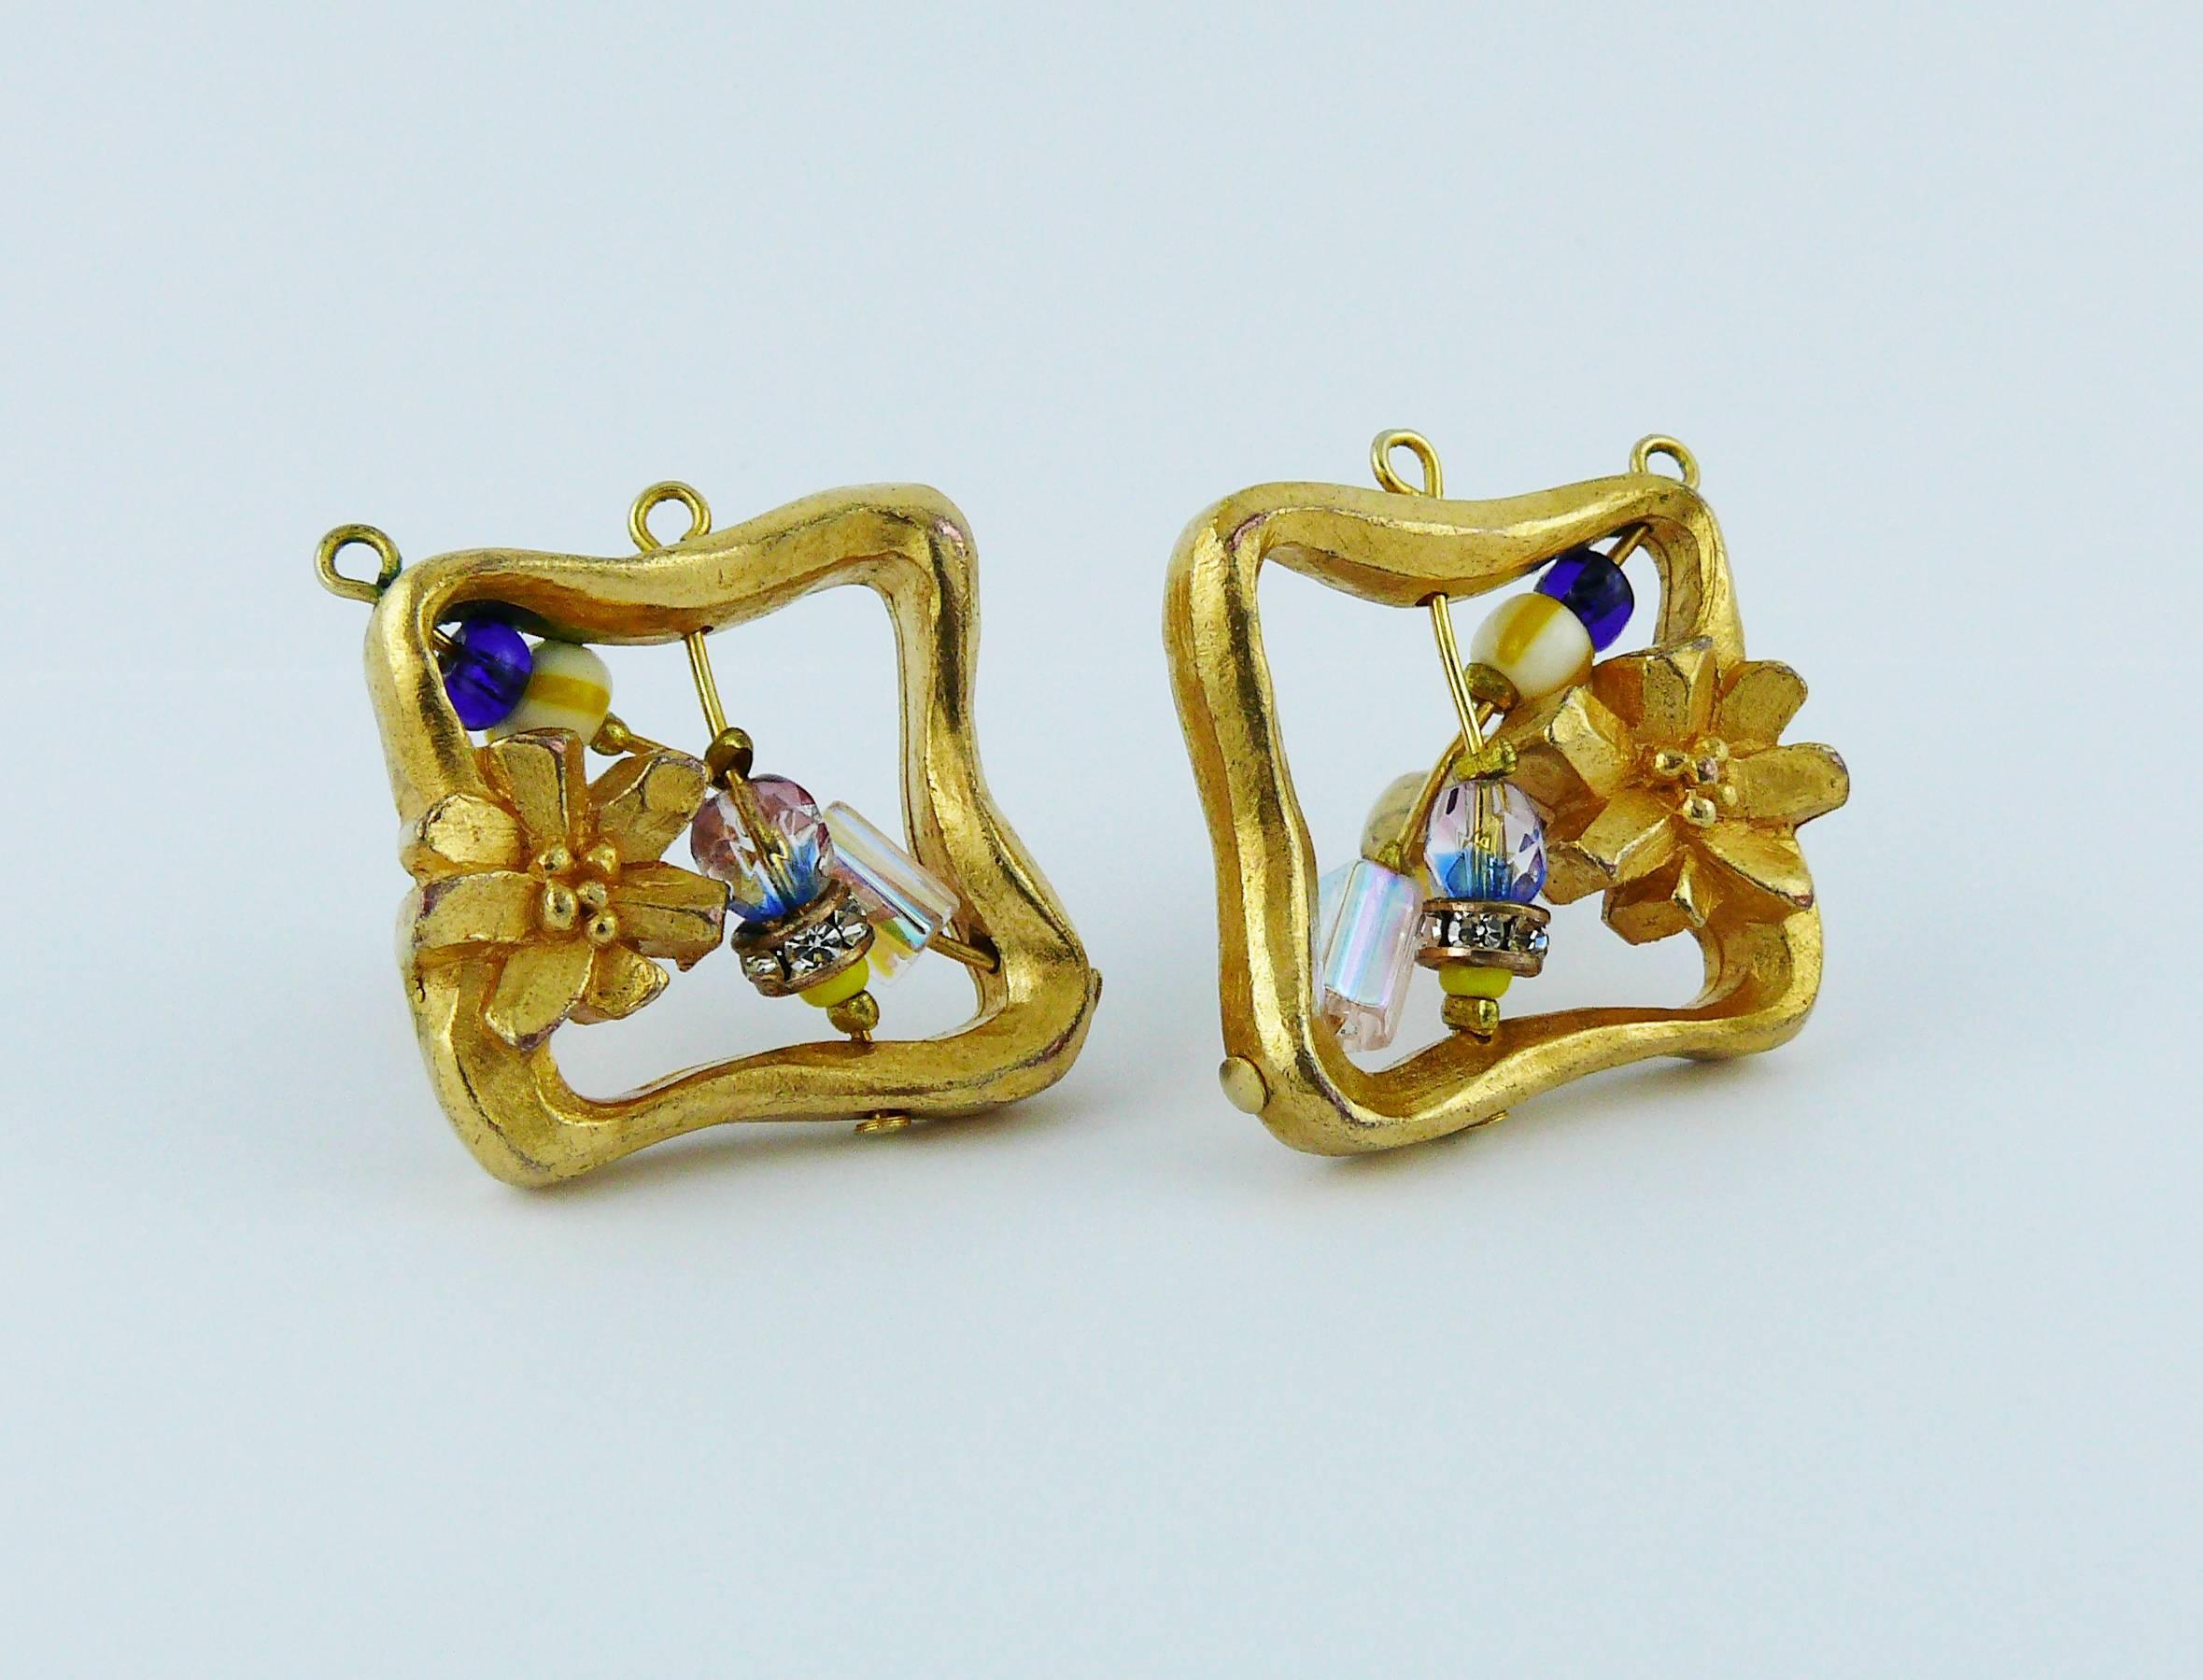 CHRISTIAN LACROIX vintage gold tone jewelled clip-on earrings.

Embossed CL Made in France.

Indicative measurements : approx. 2.9 cm (1.14 inches) x 2.9 cm (1.14 inches).

JEWELRY CONDITION CHART
- New or never worn : item is in pristine condition